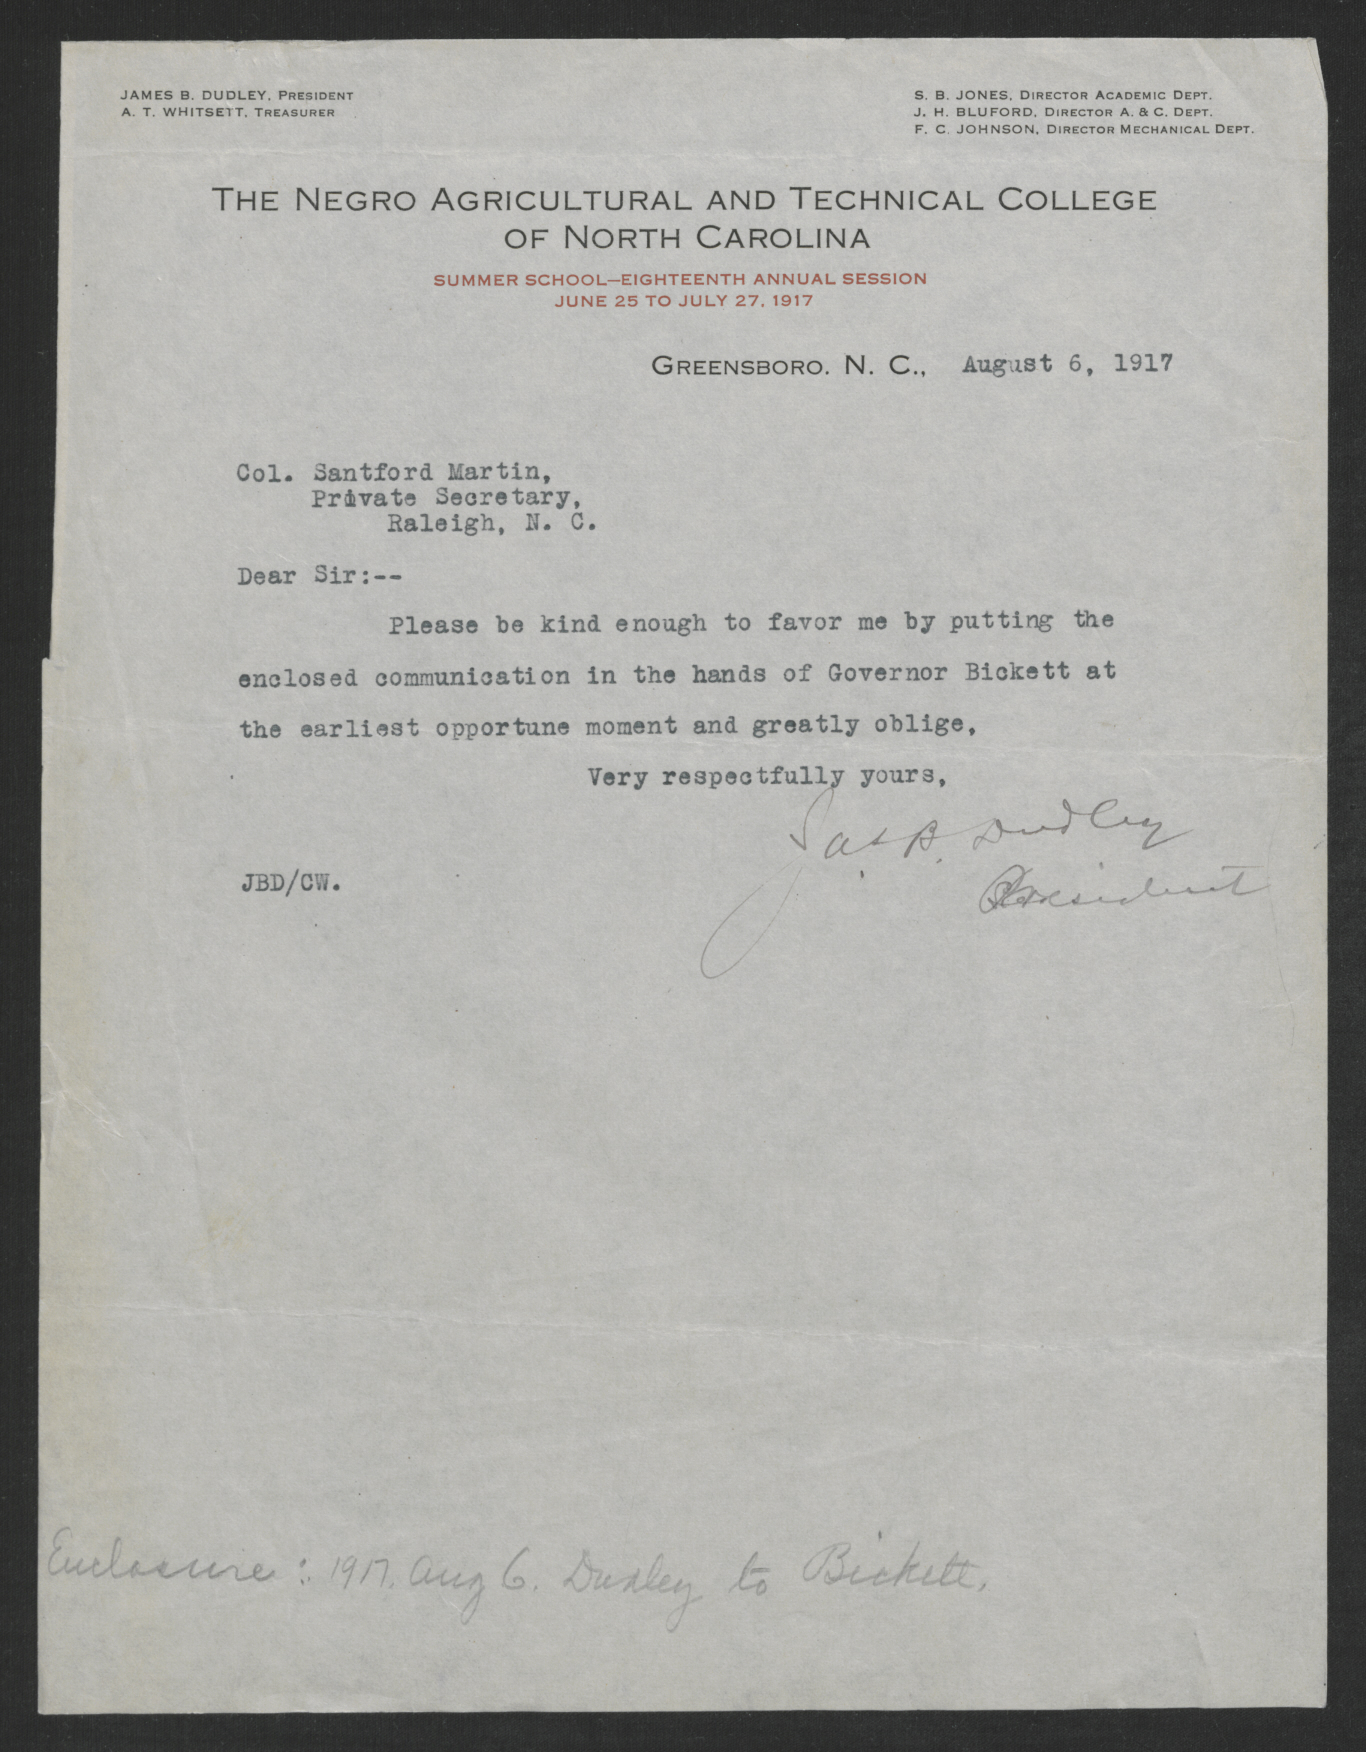 Letter from James B. Dudley to Gov. Bickett, August 6, 1917